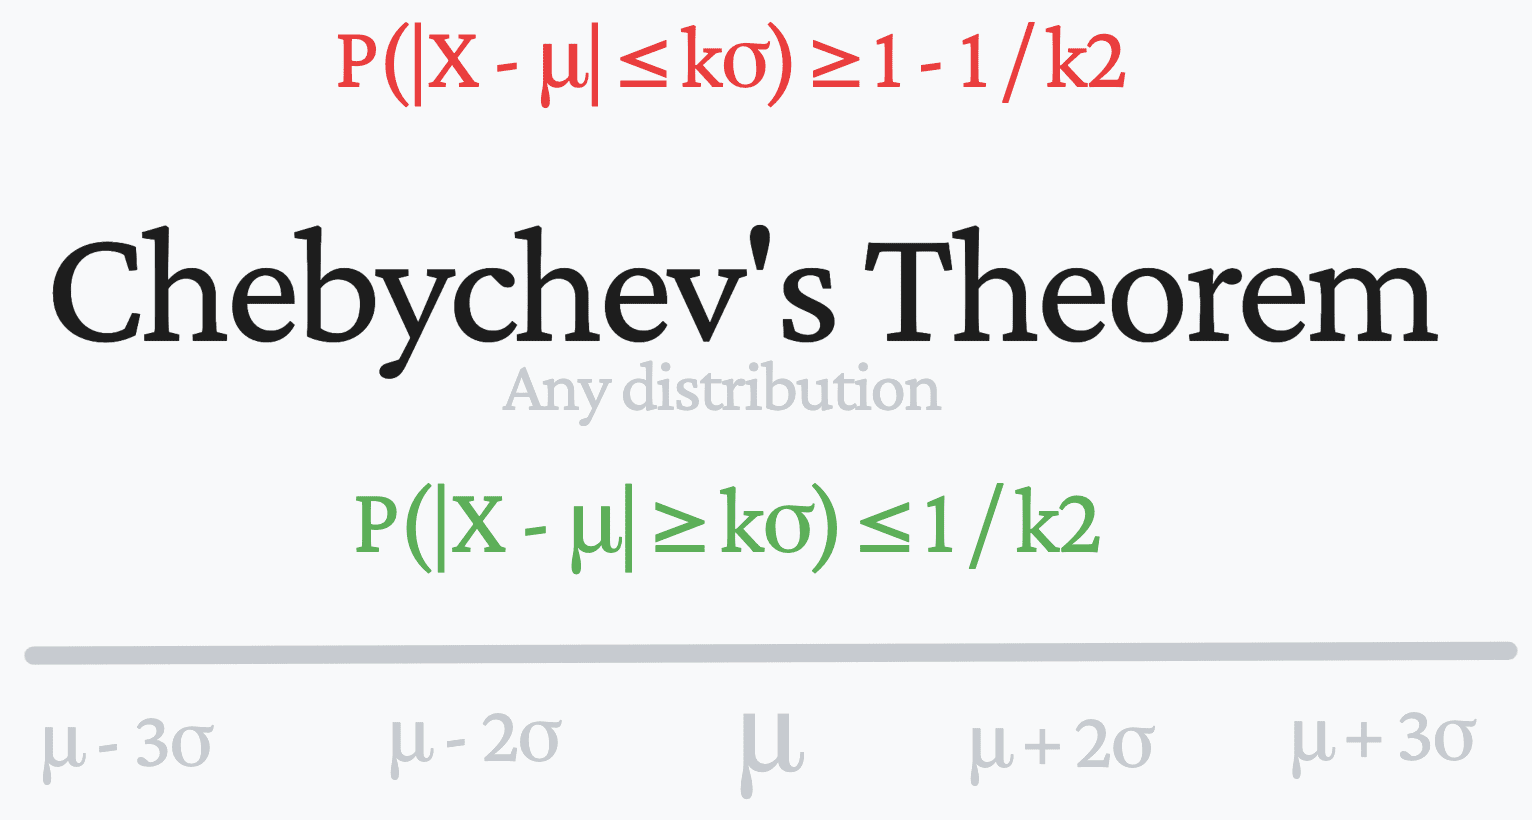 What is Chebychev’s Theorem and How Does it Apply to Data Science?